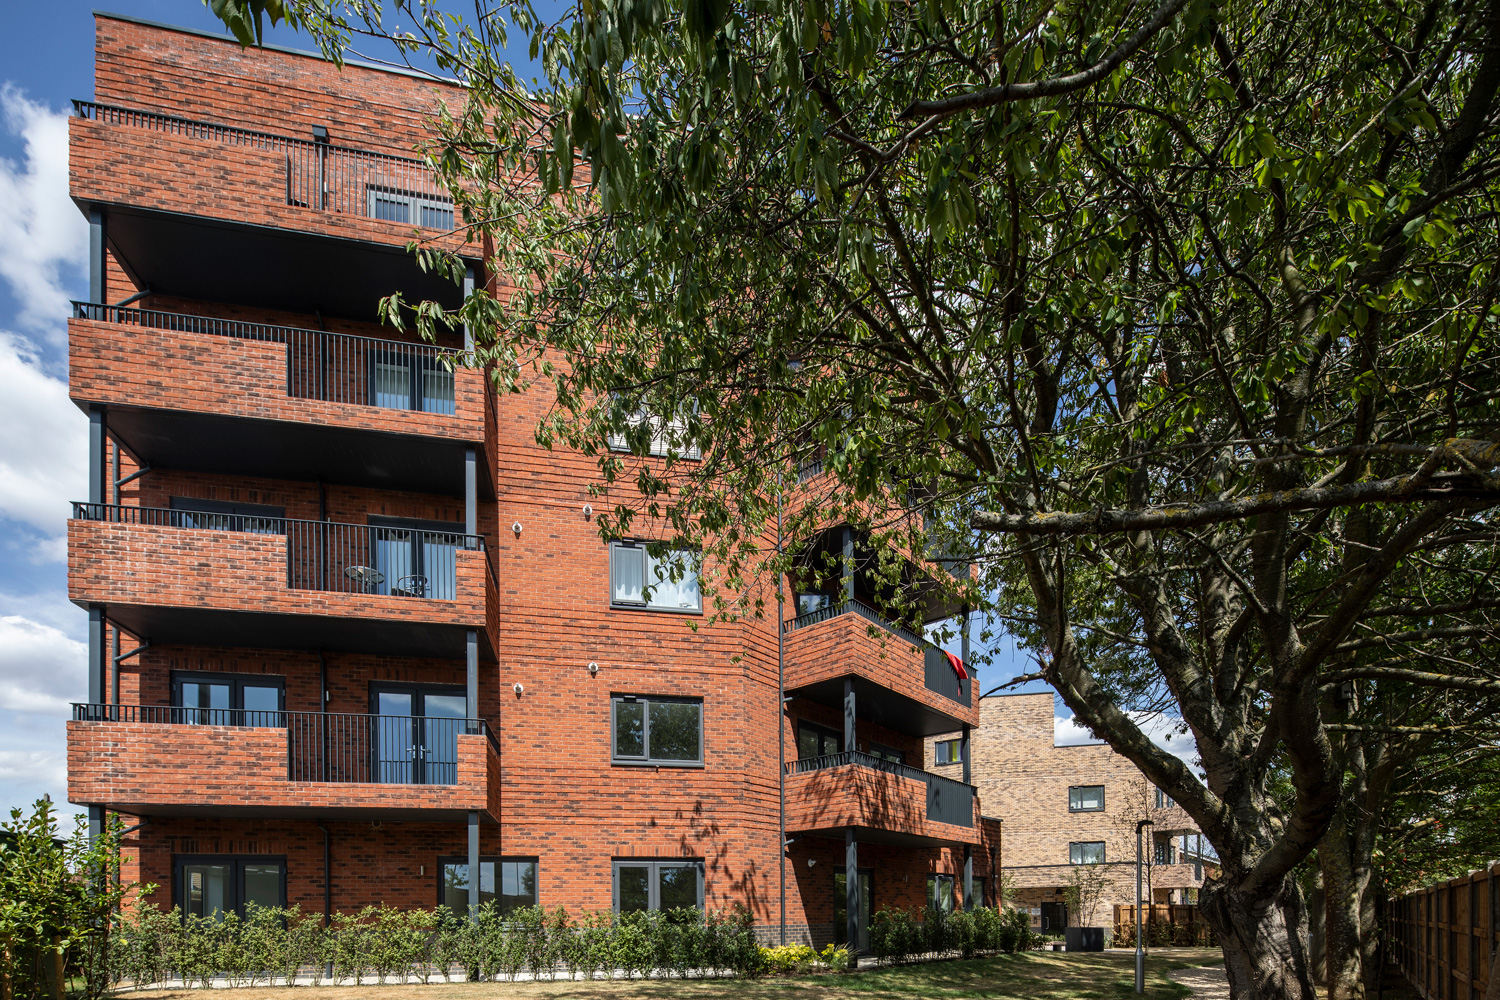 Supported Housing, Hounslow, Two bridges, London, Residential Architecture, Residential, WWA Studios, WWA, West Waddy Archadia, West Waddy, Archadia, Architecture, Urban Design, Town Planning